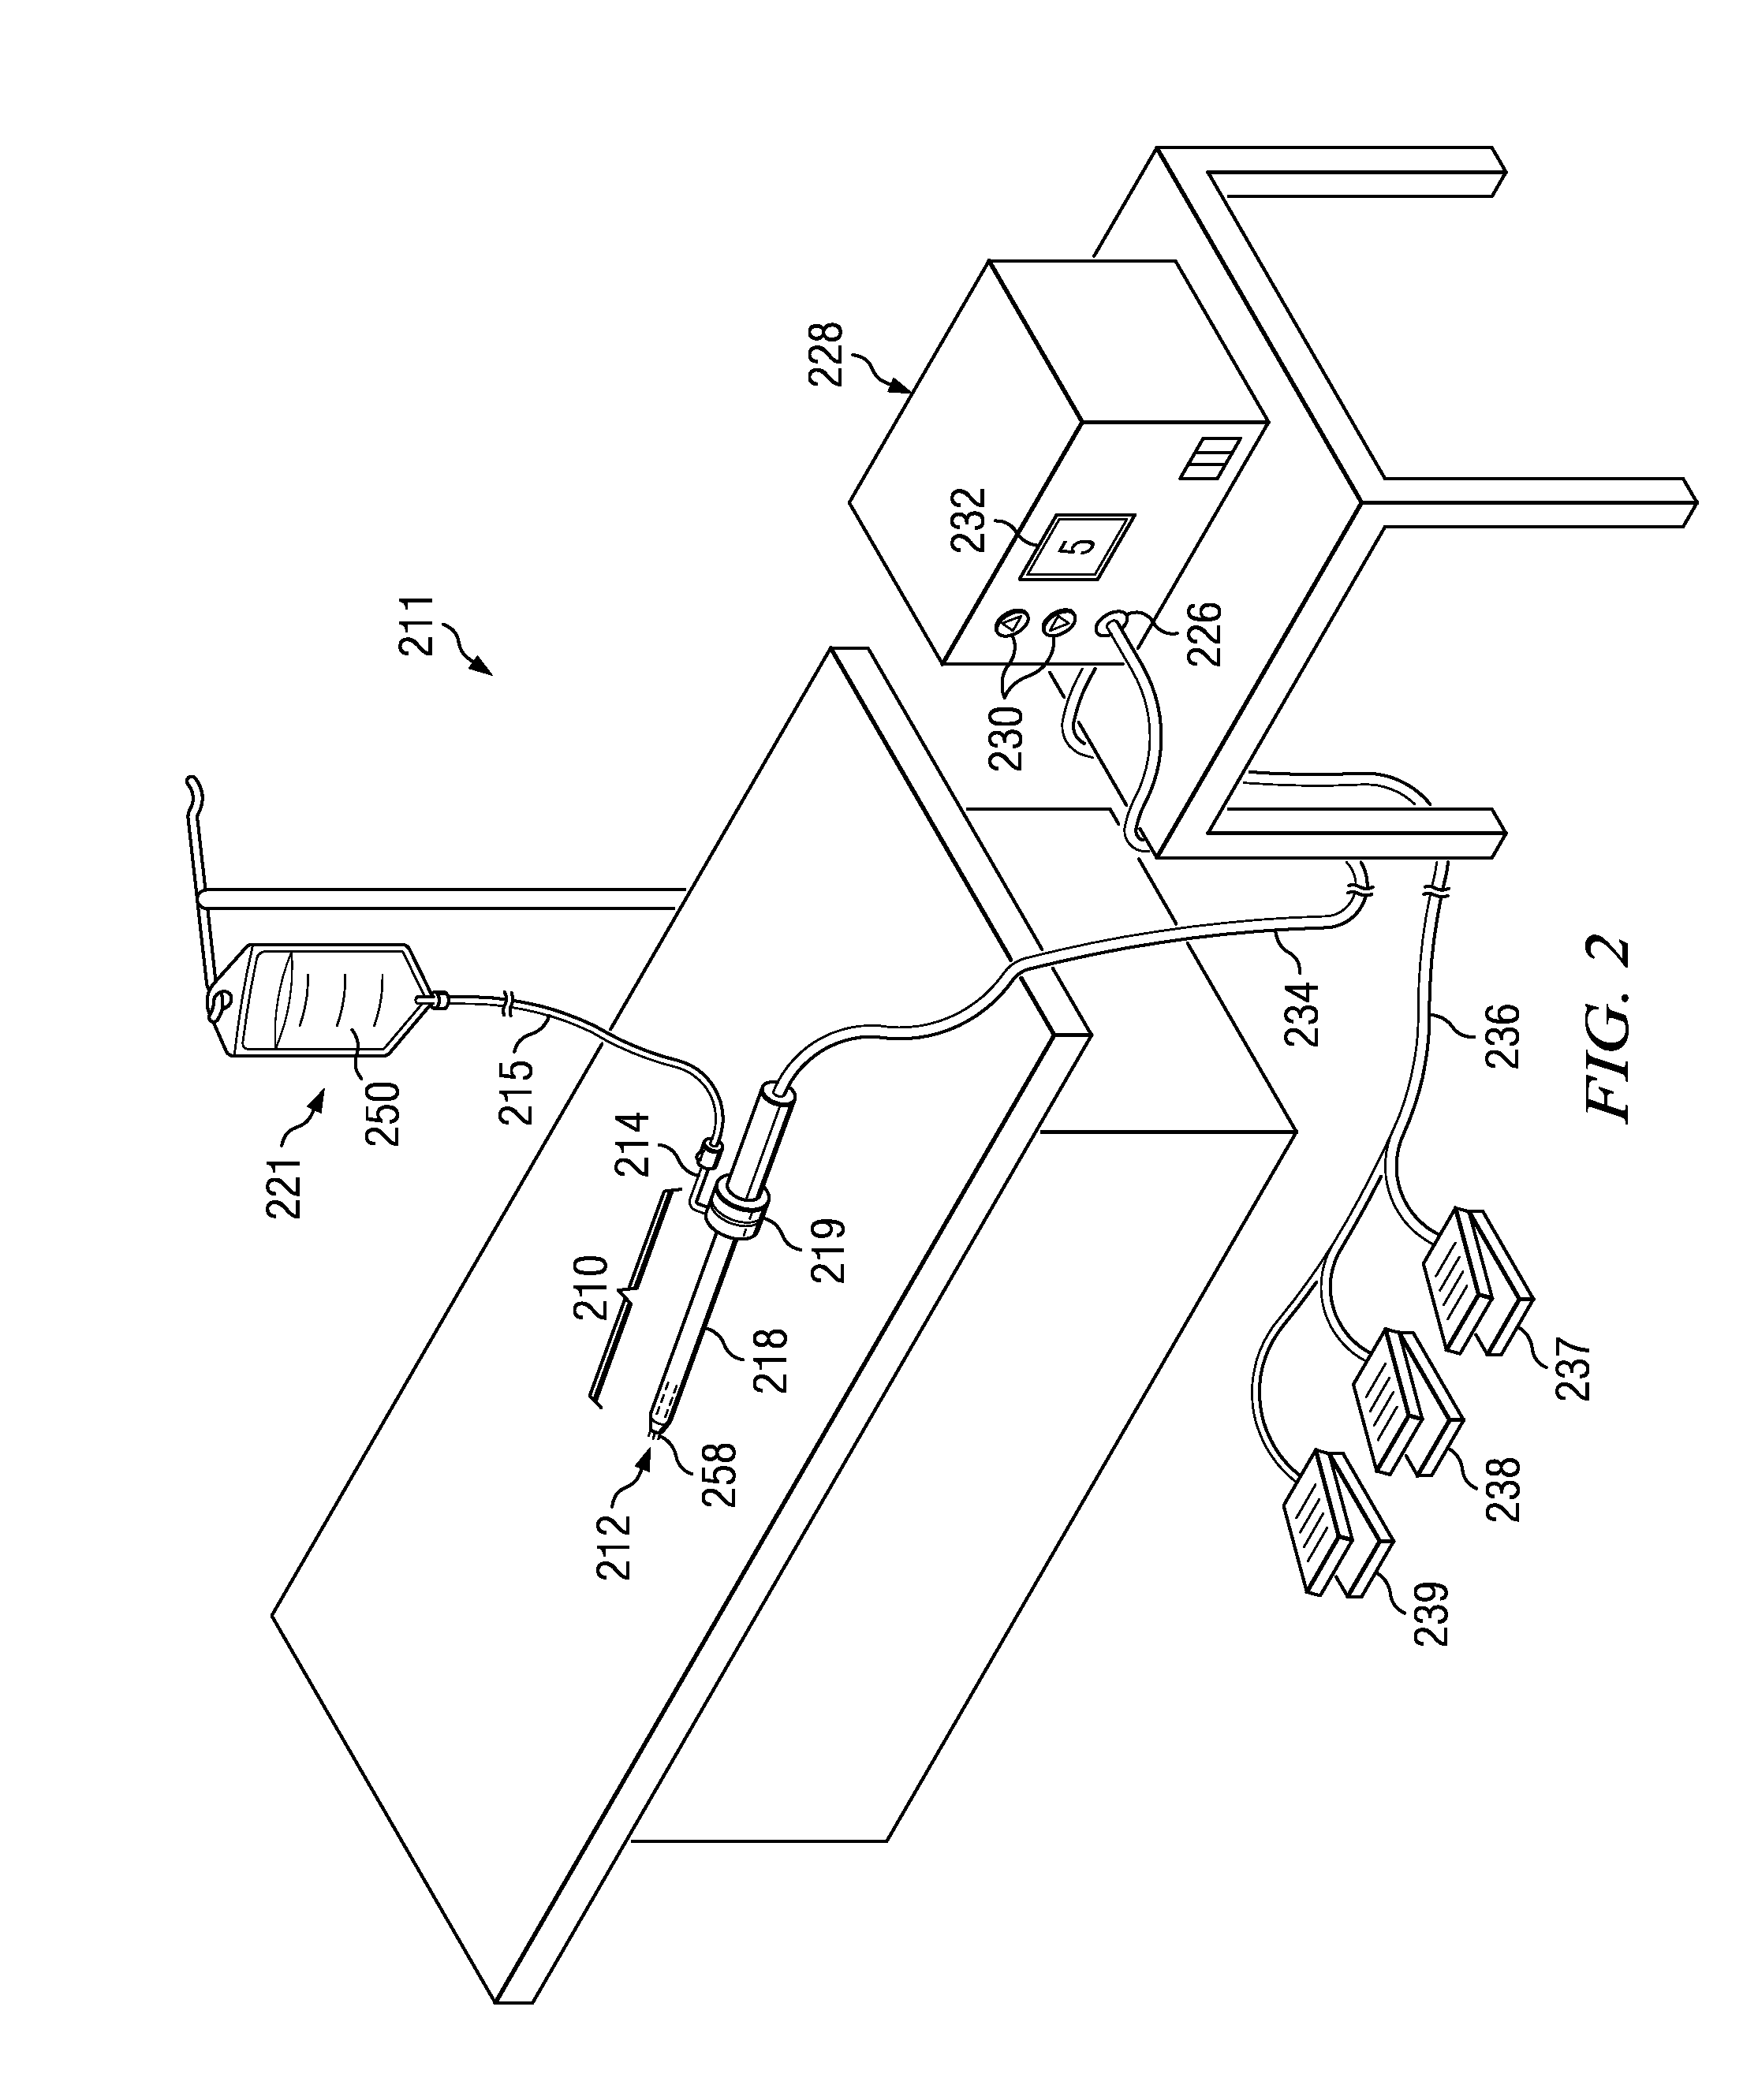 Systems and methods for screen electrode securement